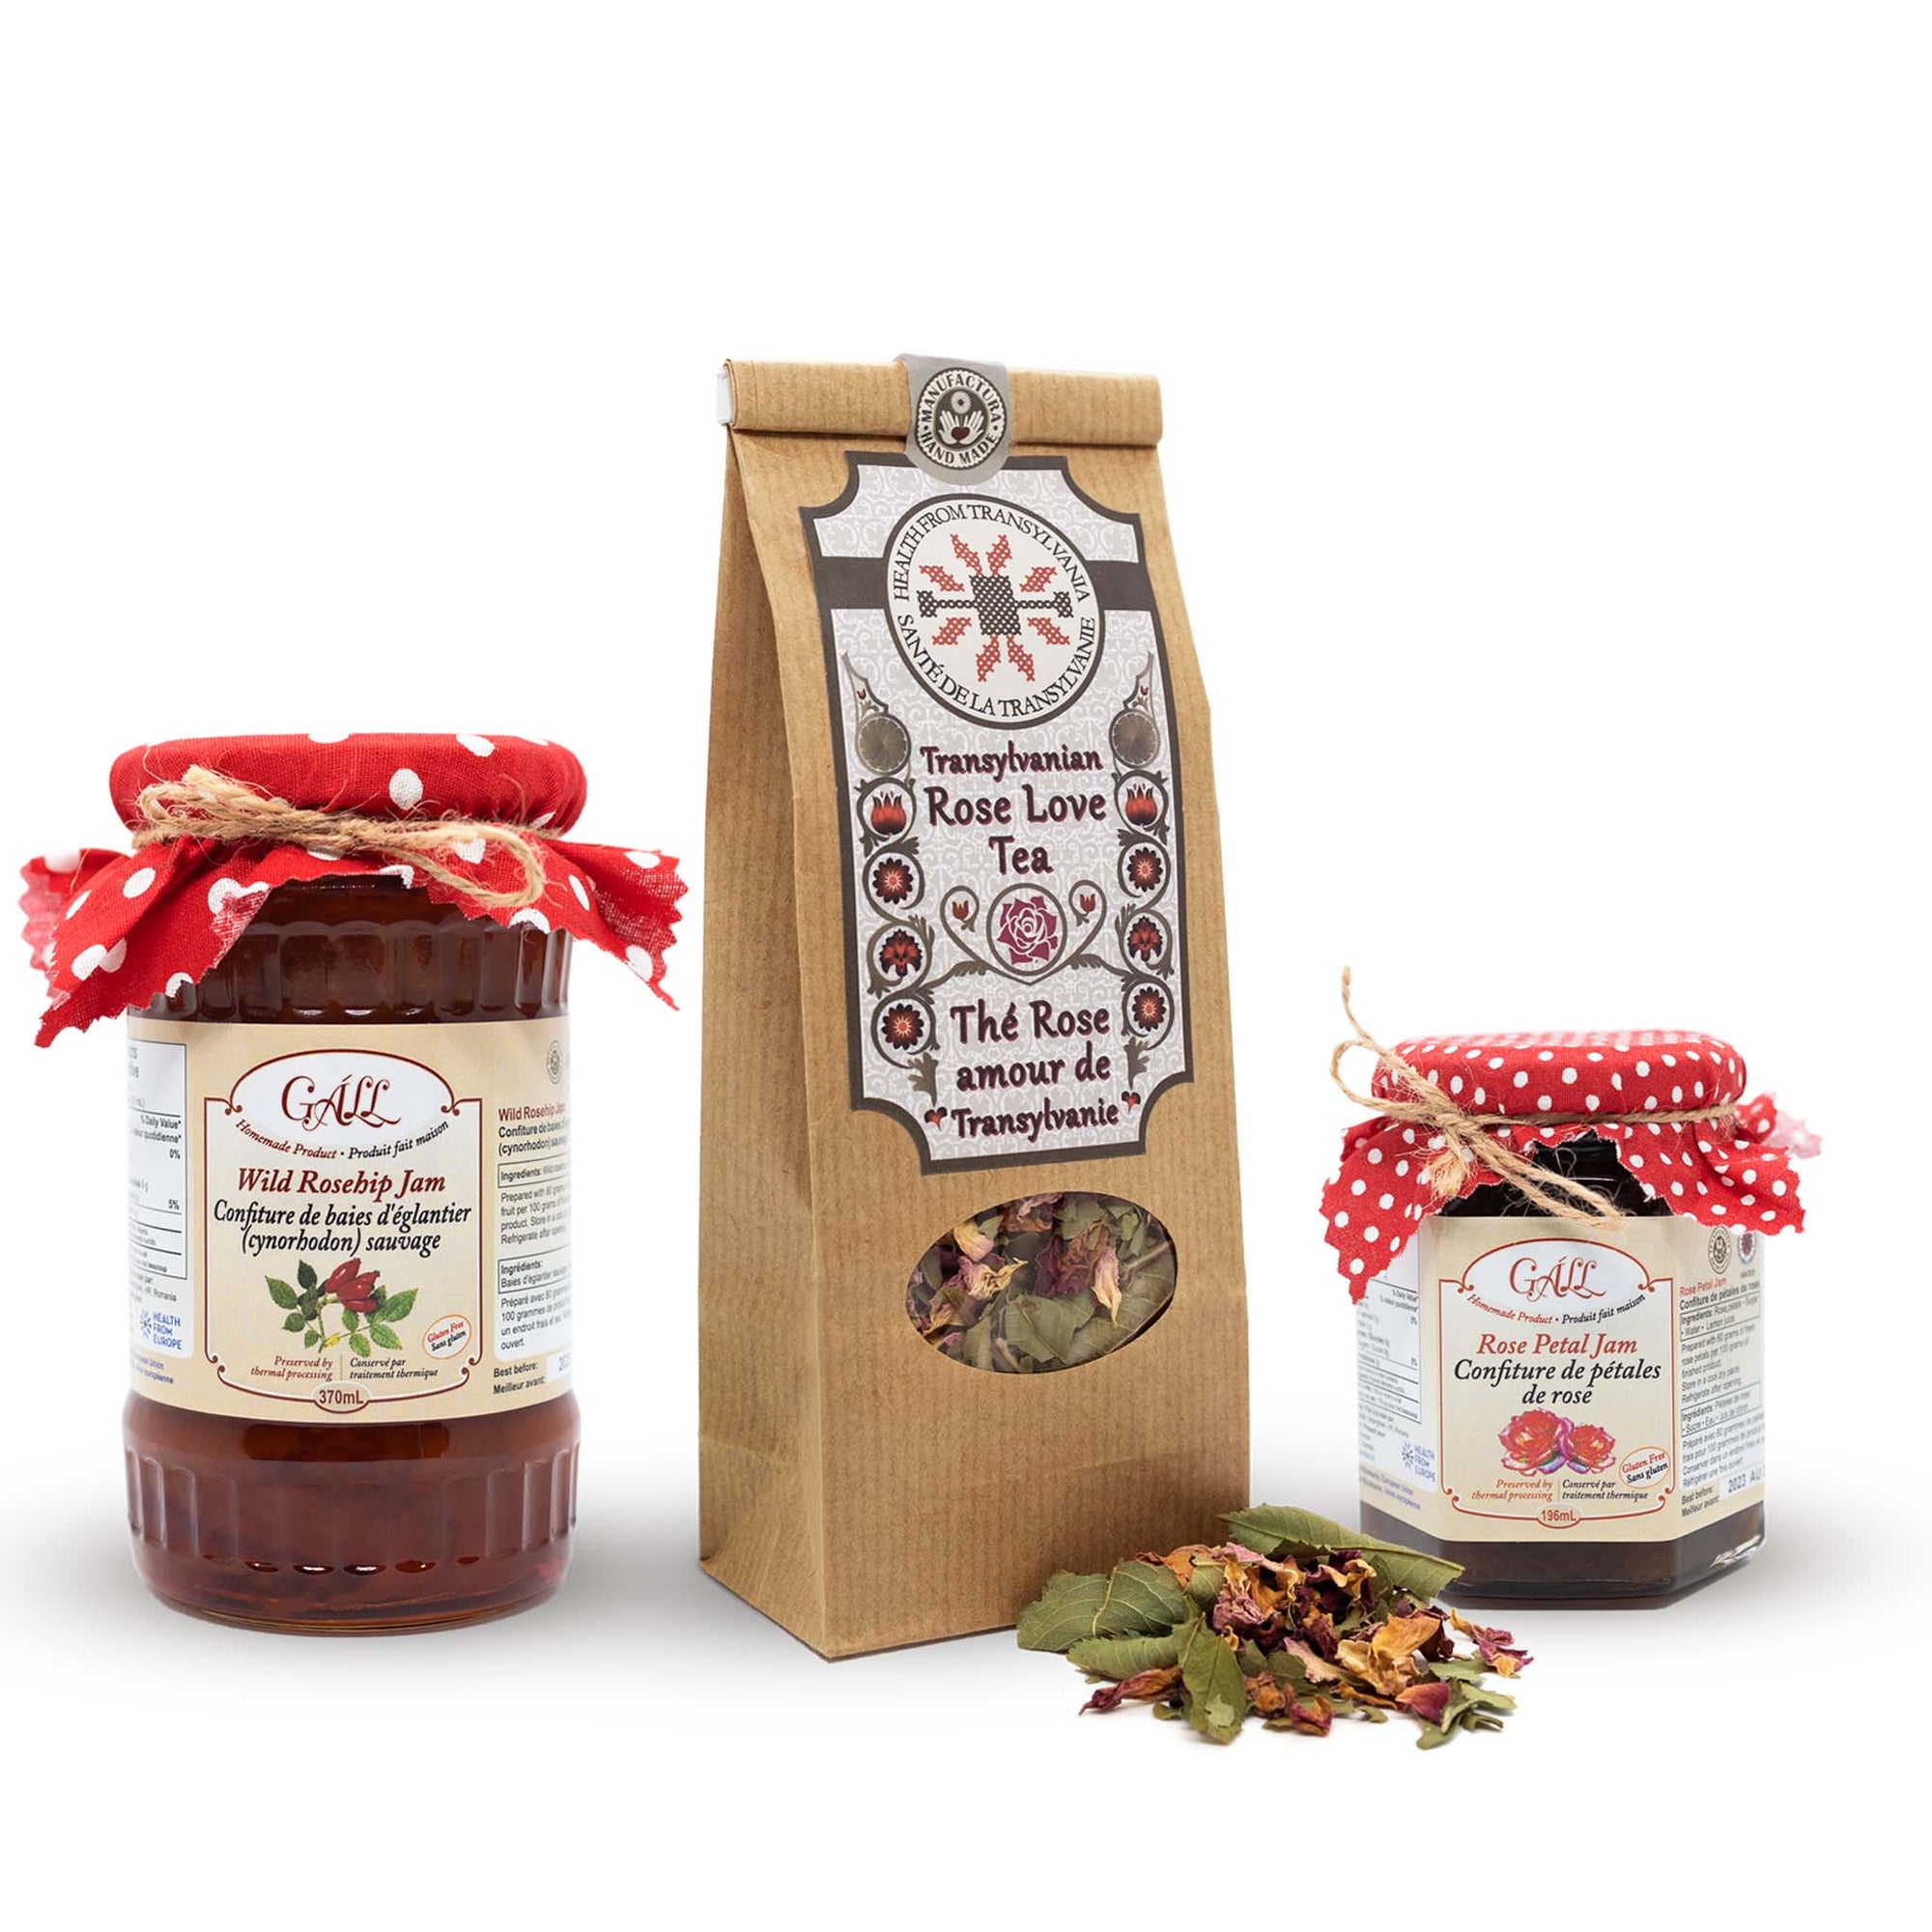 Sweet Rose Gift Set - Organic  Herbal Teas and Fruit Jams from the Rose family